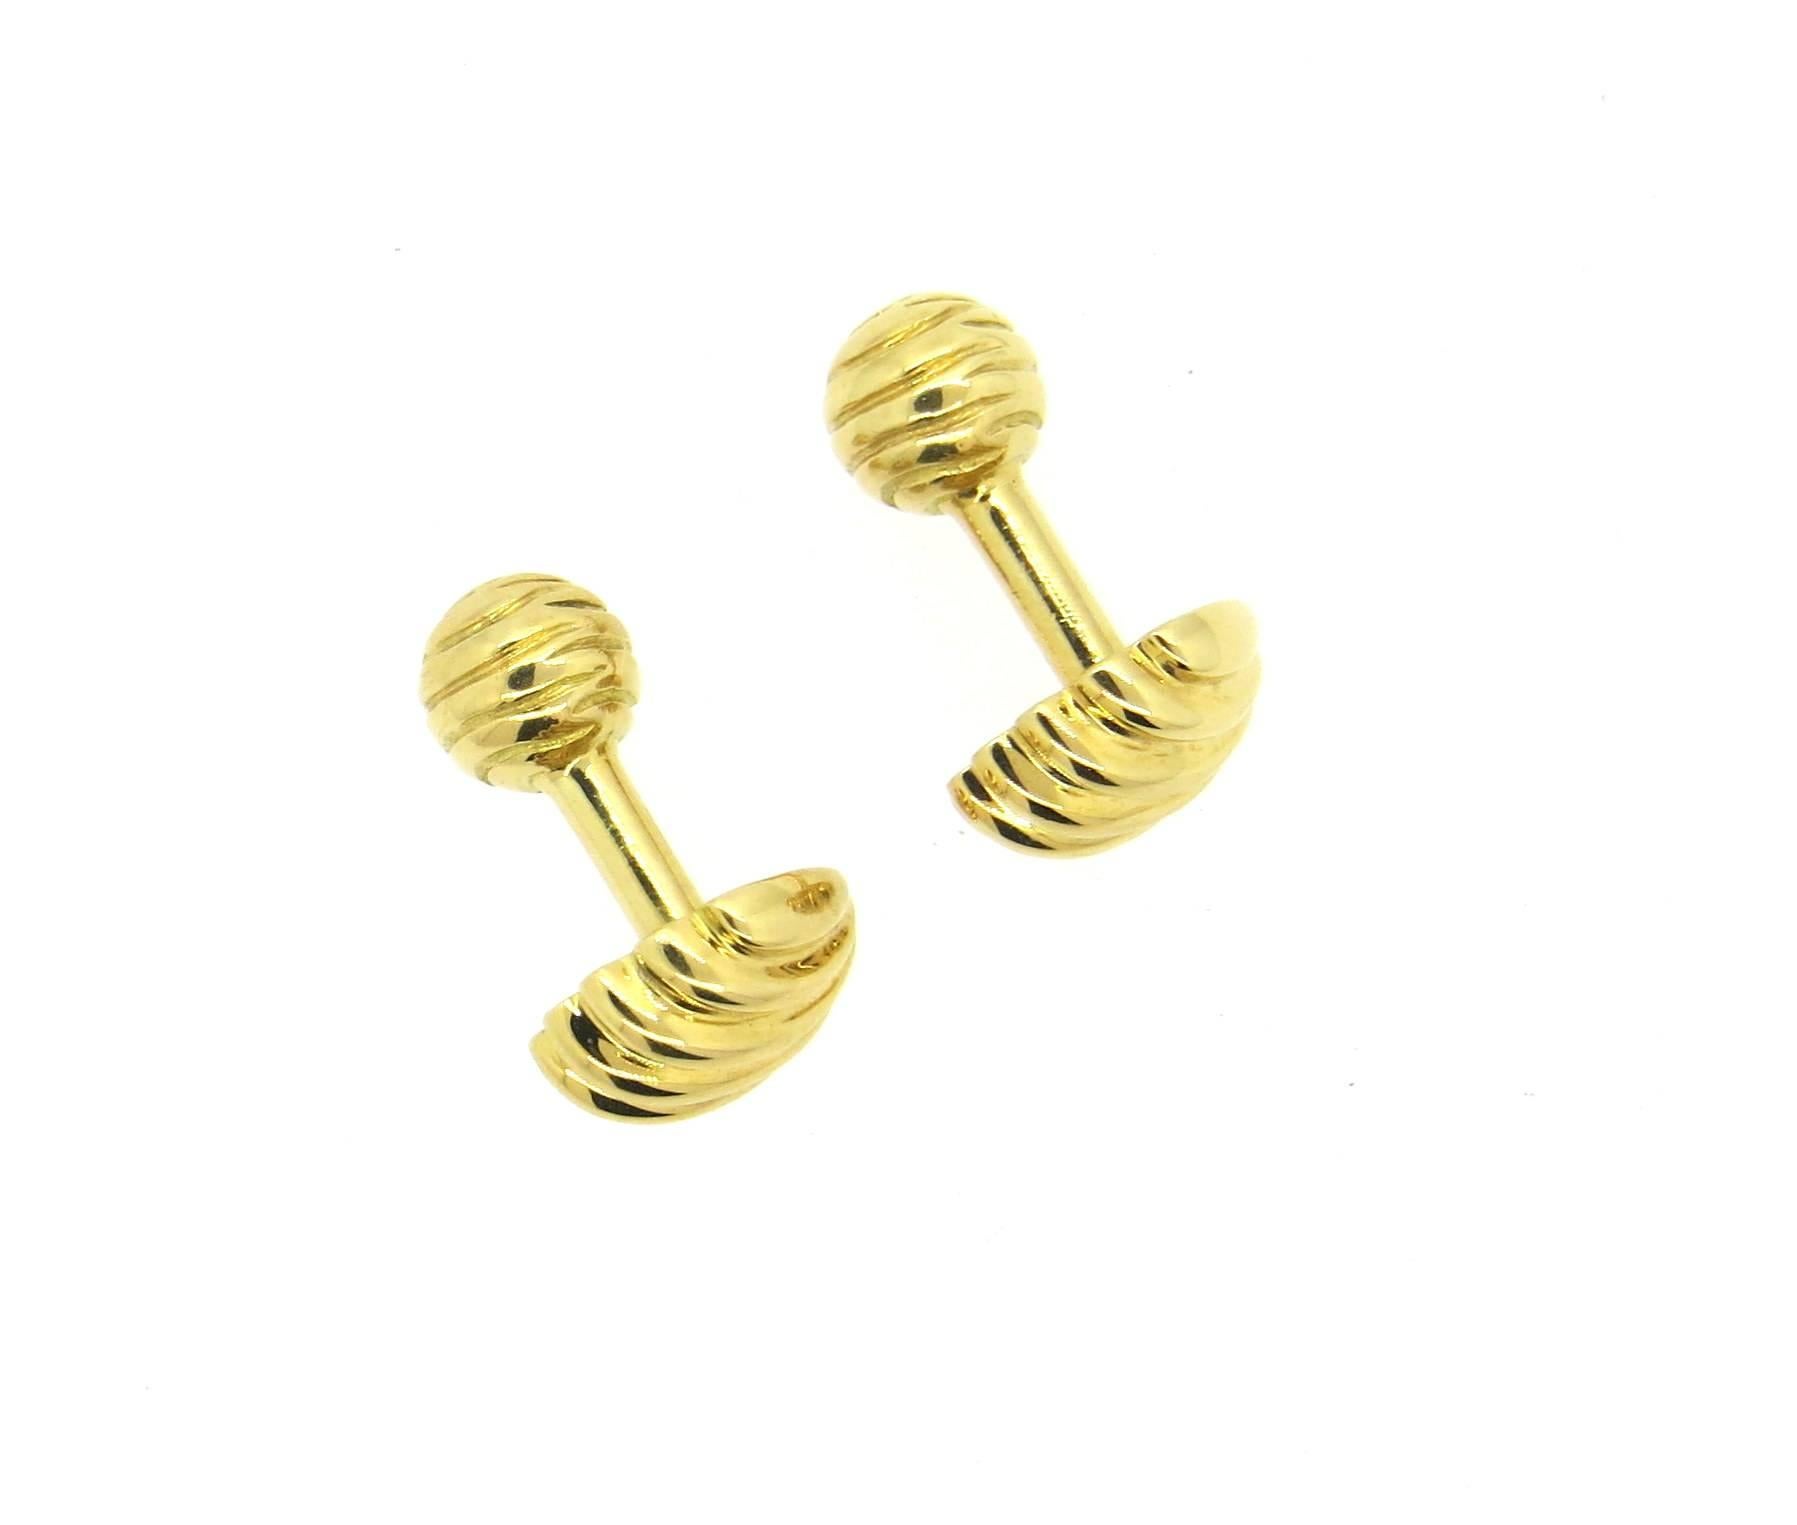 Large 18k yellow gold cufflinks, crafted by Tiffany & Co, featuring shell motif top. Cufflink top measures 16mm x 15mm, back - 10mm in diameter. Marked Tiffany & Co, Italy, 750. Weight - 28.8 grams